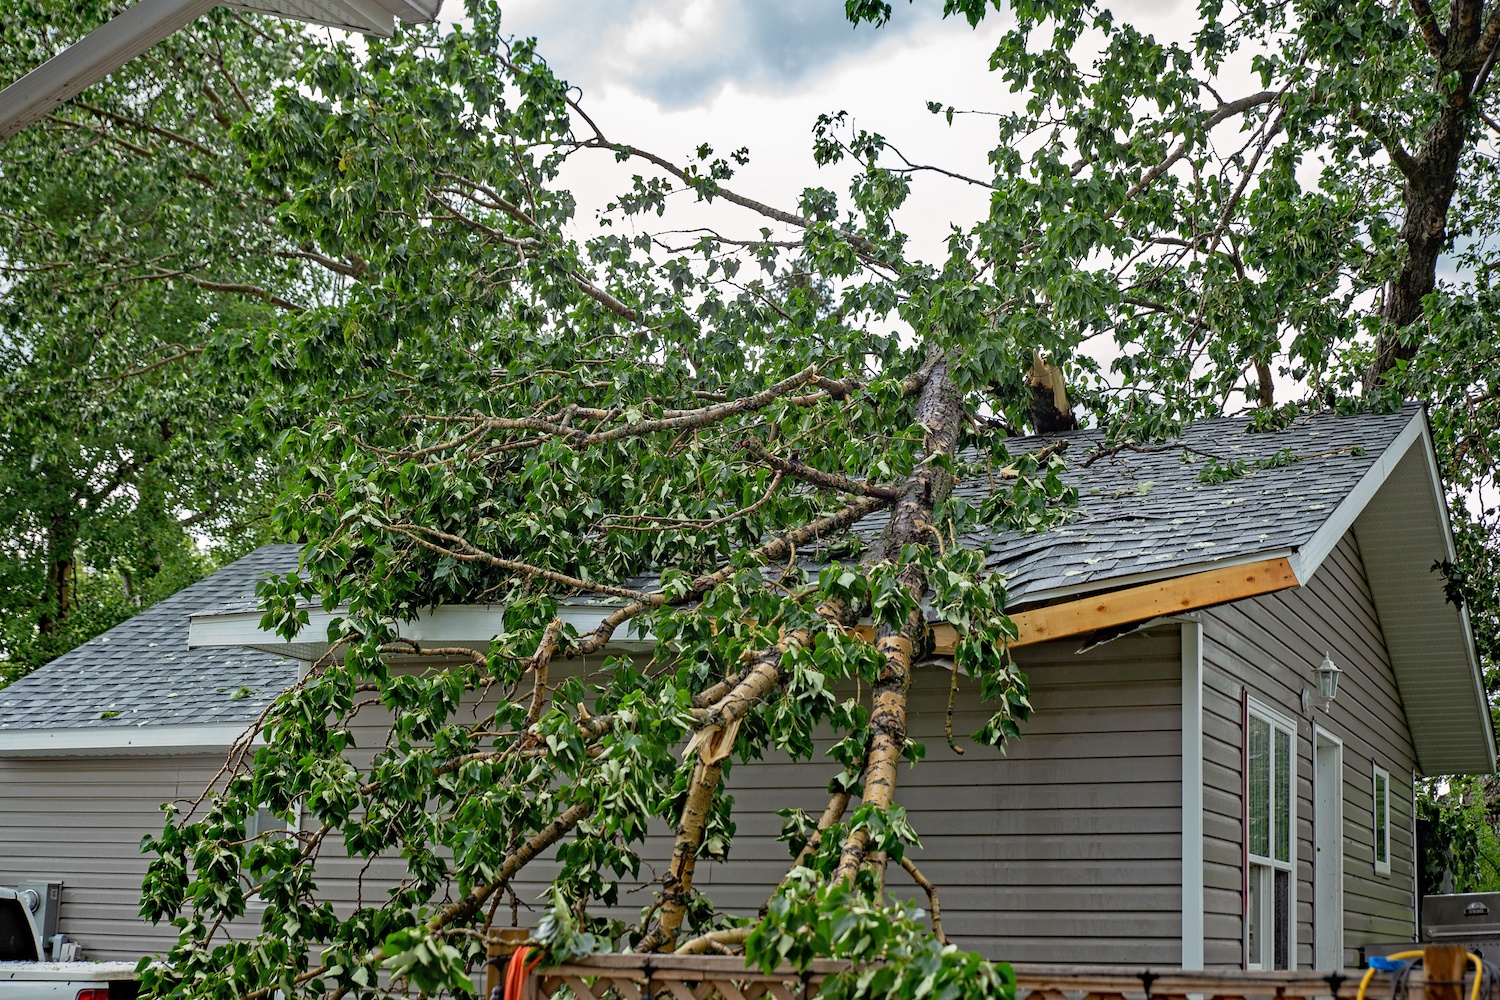 A large tree with green leaves fallen on a residential rooftop during a summer storm